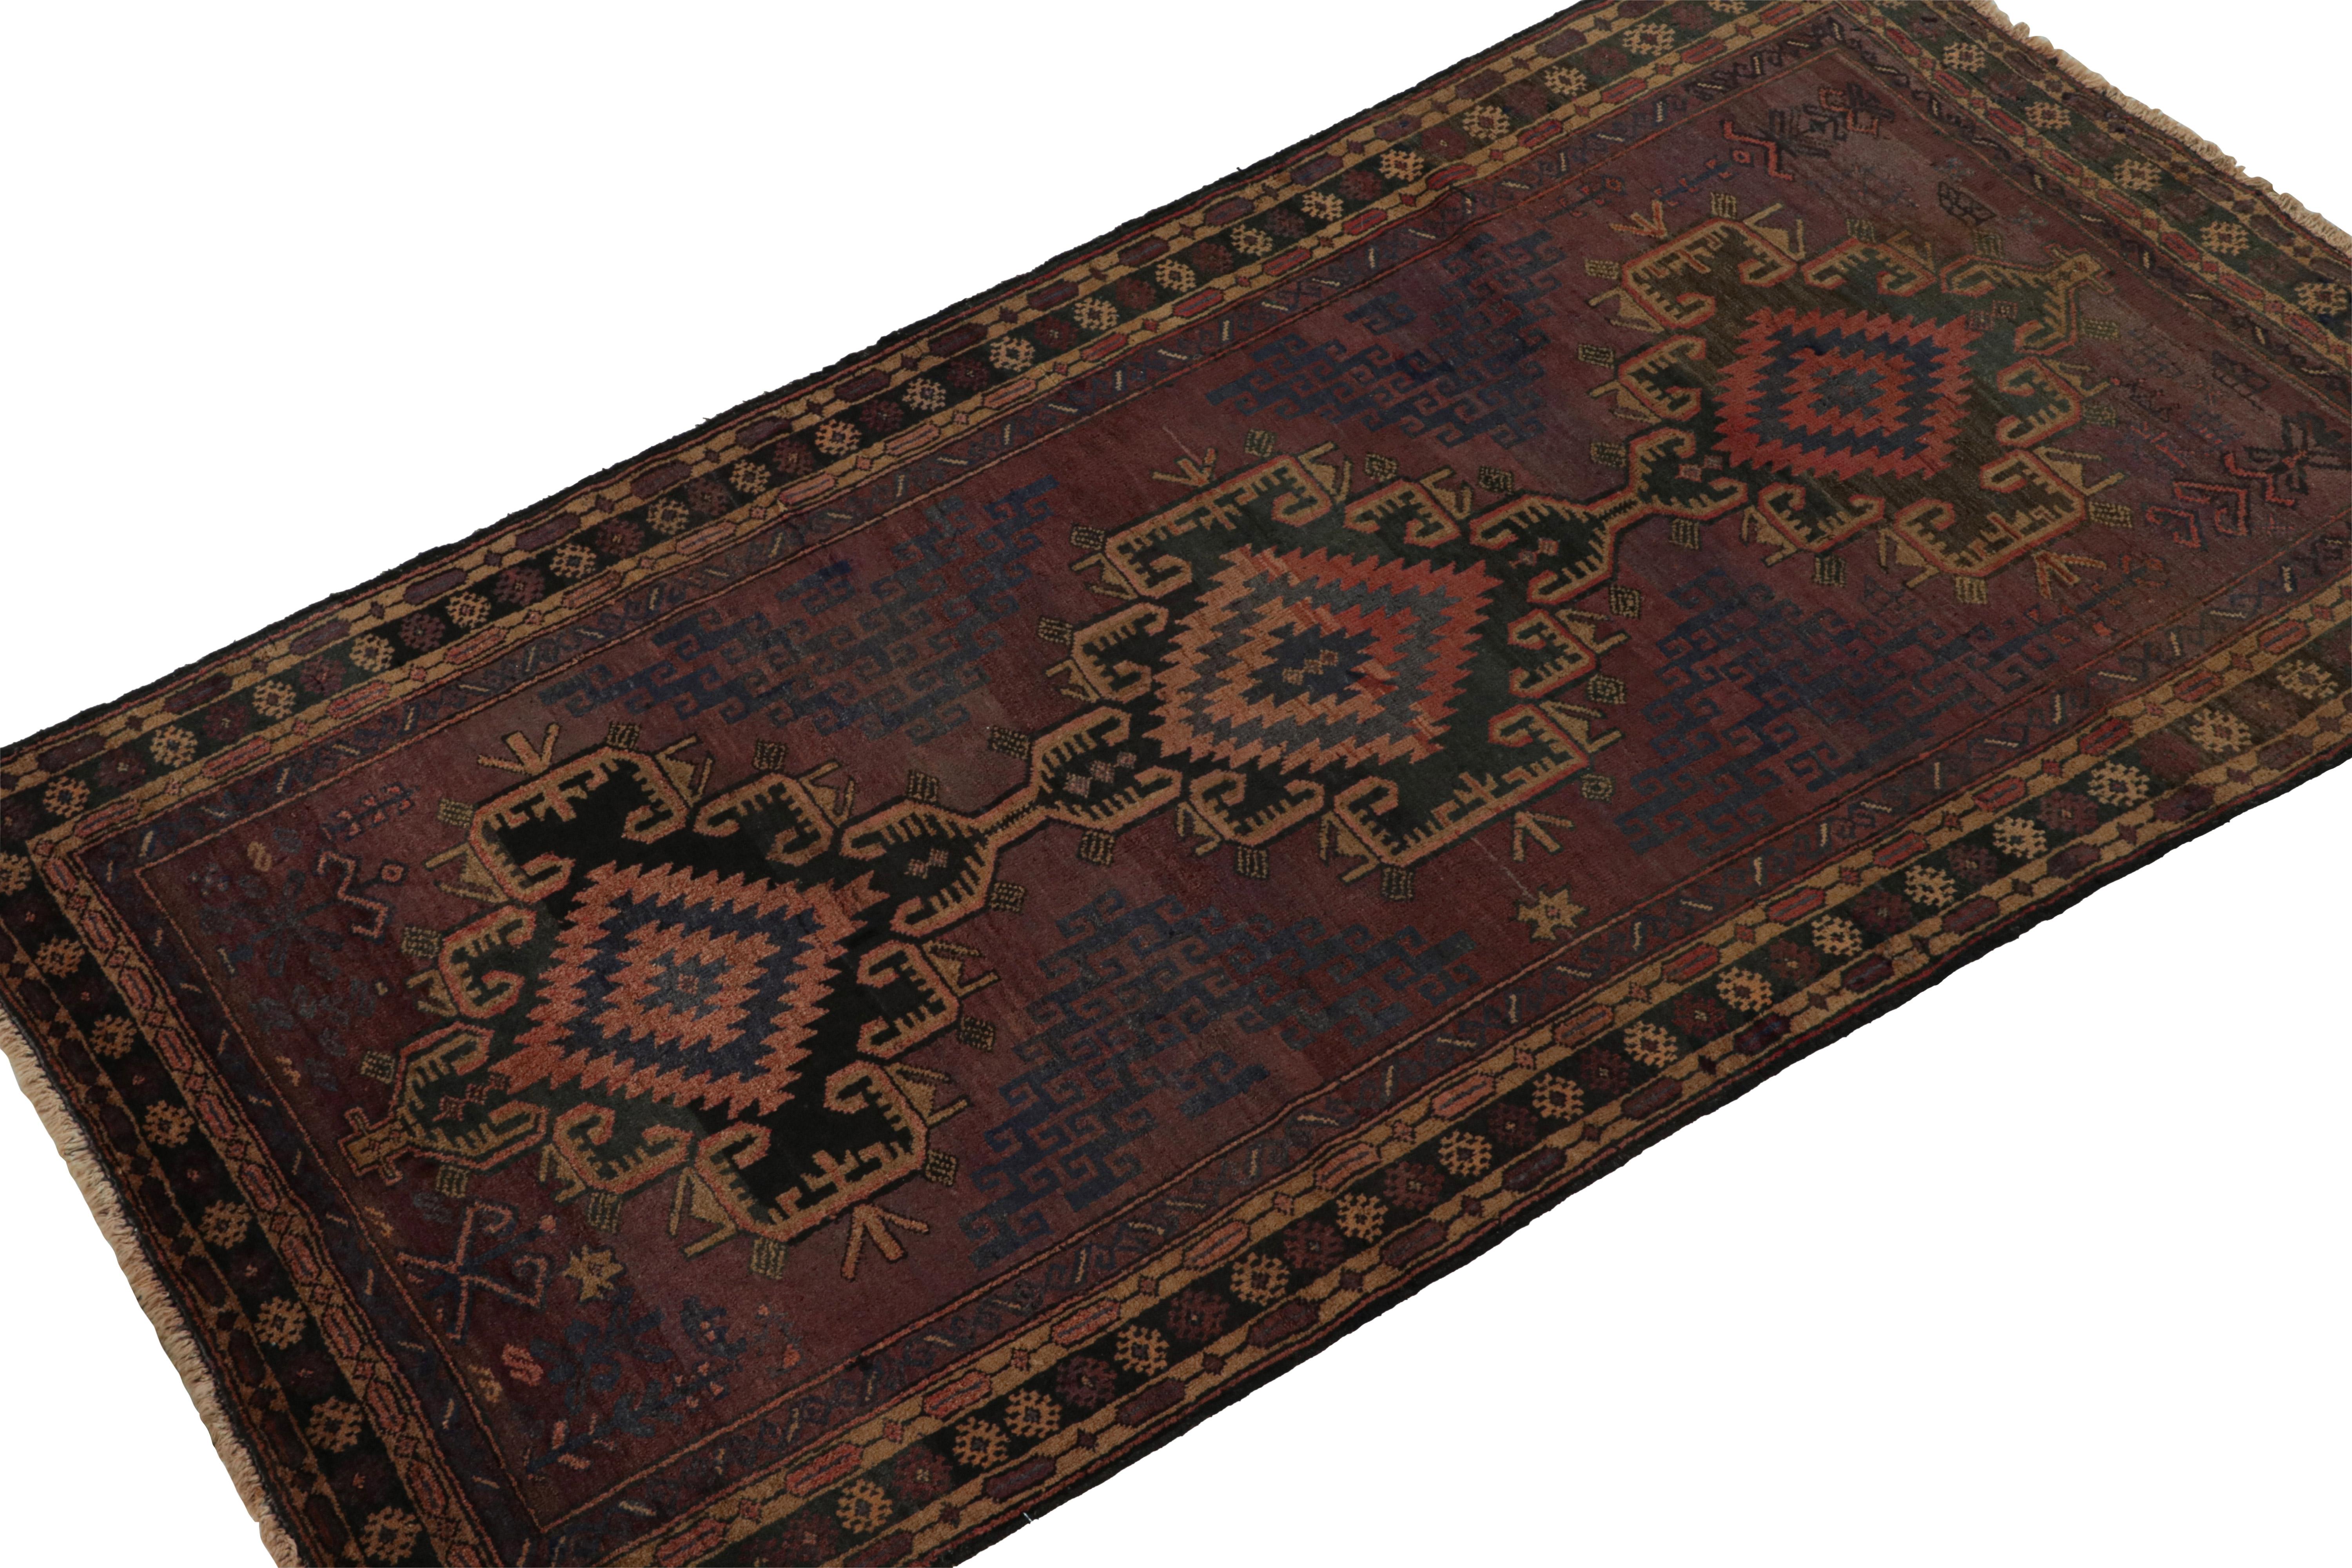 Hand-knotted in wool and goat hair circa 1950-1960, this 4x7 vintage Baluch tribal rug is an exciting new curation from Rug & Kilim. 

On the Design: 

This runner rug enjoys a play of bold medallions and geometric patterns in rich red, navy blue